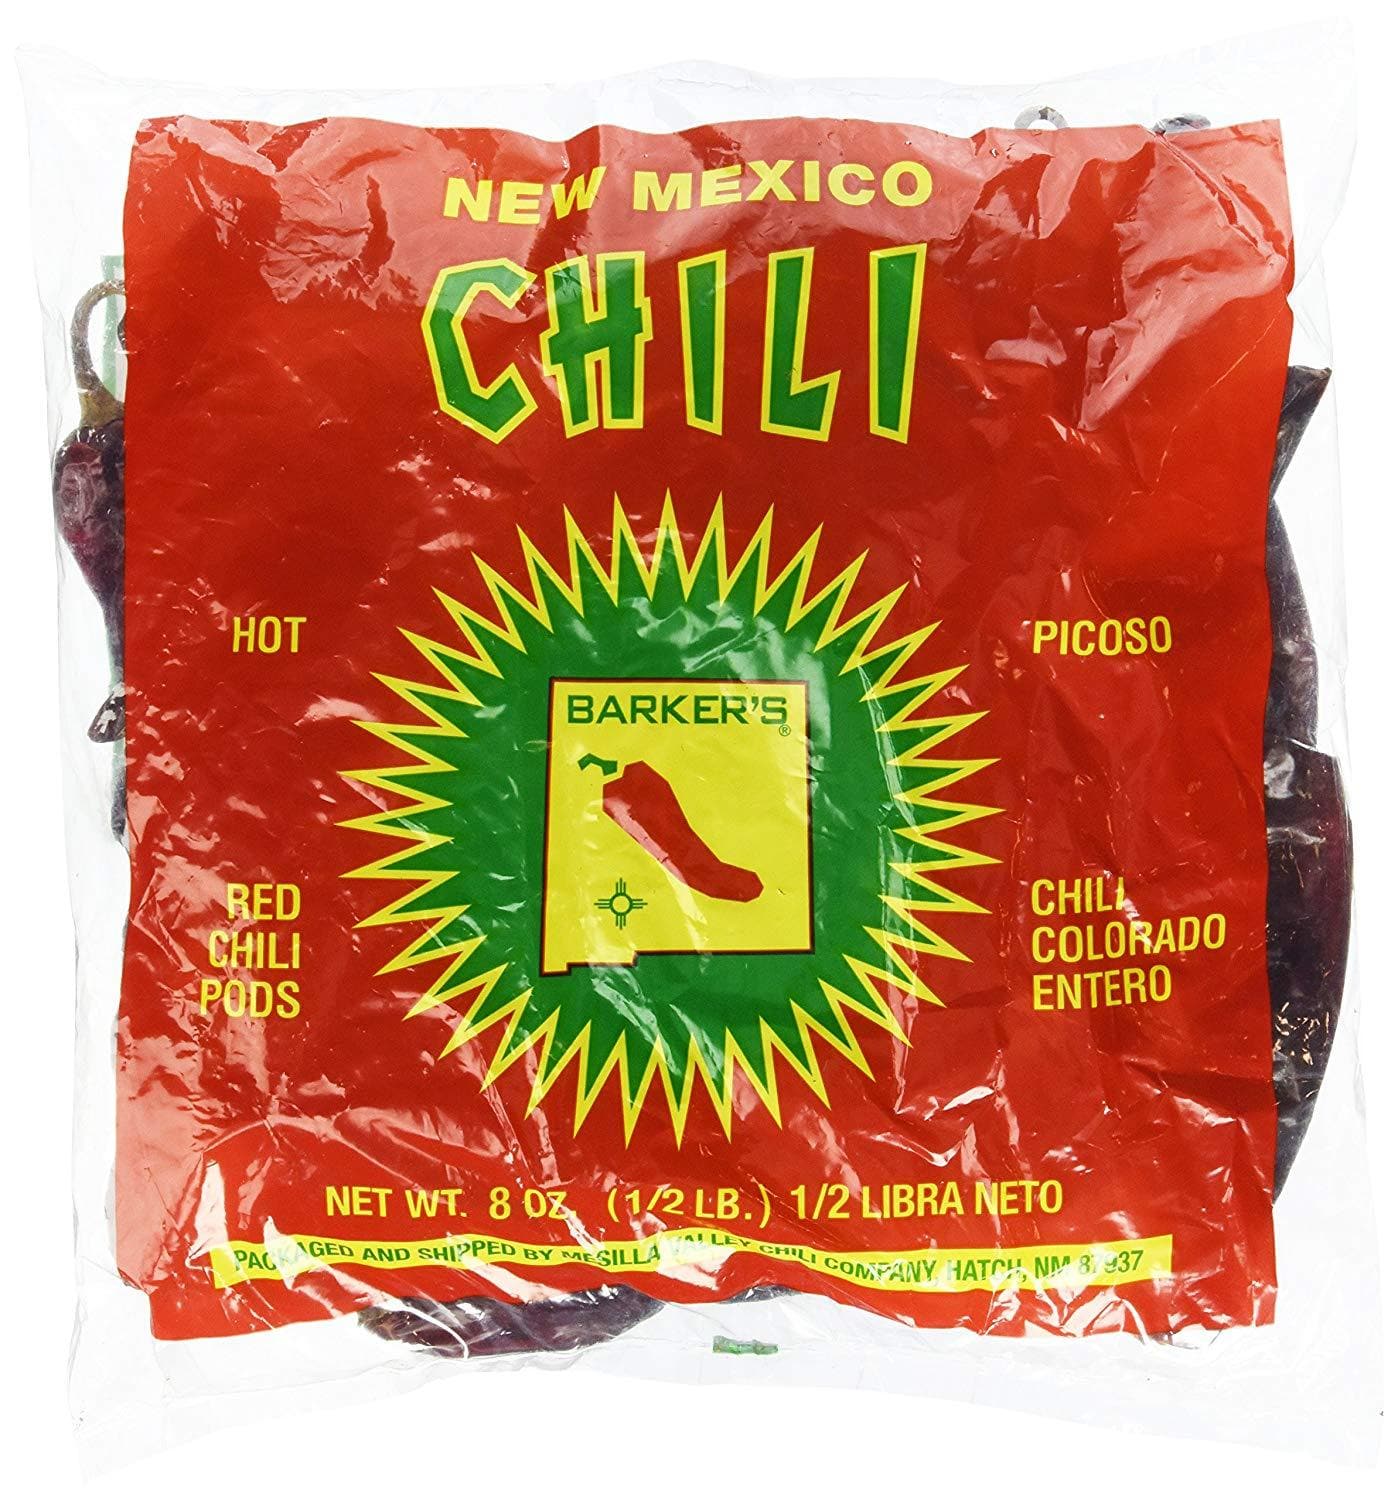 A vibrant package of Dried Hatch Red Chile Pods, featuring bold red and green colors with a graphic of a red chili pepper, noting it's a hot variety of Hatch Red Chile Pods.